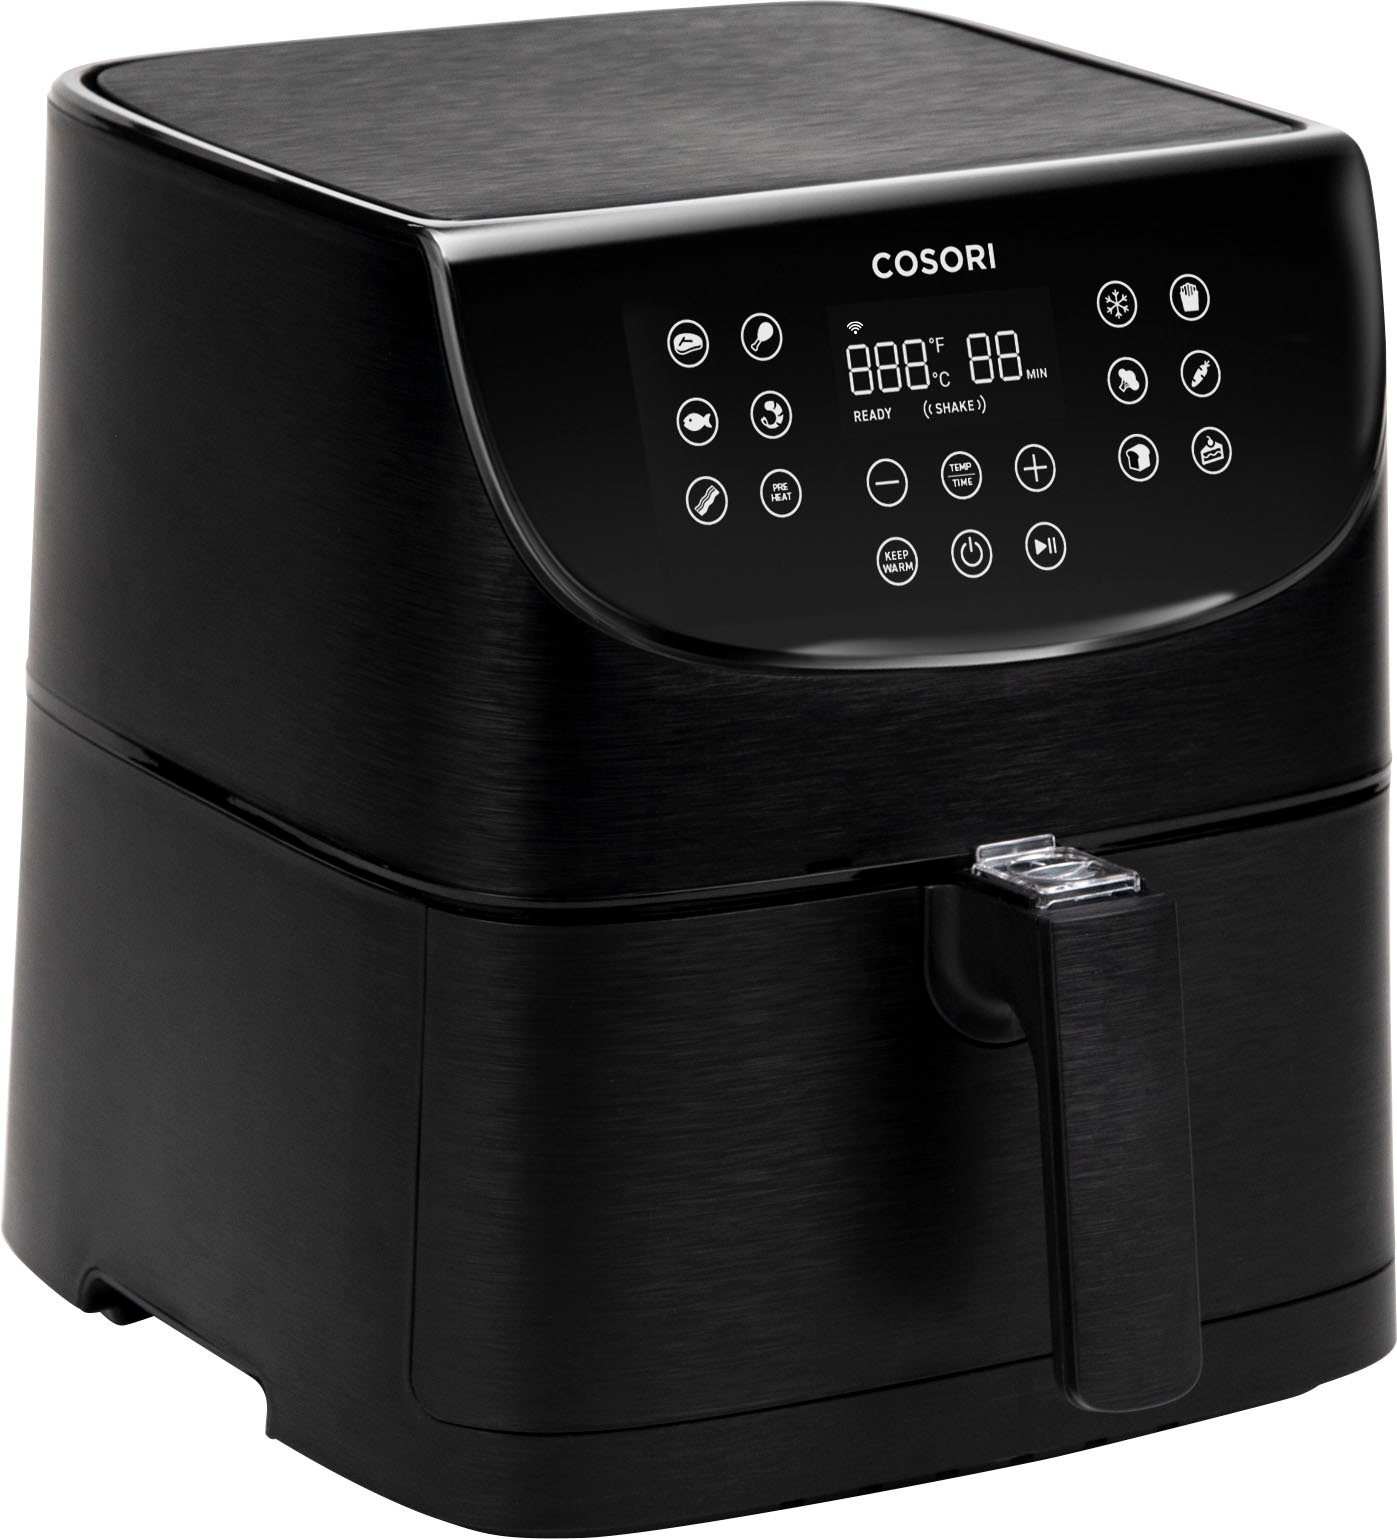 COSORI Pro II Smart Air Fryer 5.8QT. For family use!!! Healthier cooking 